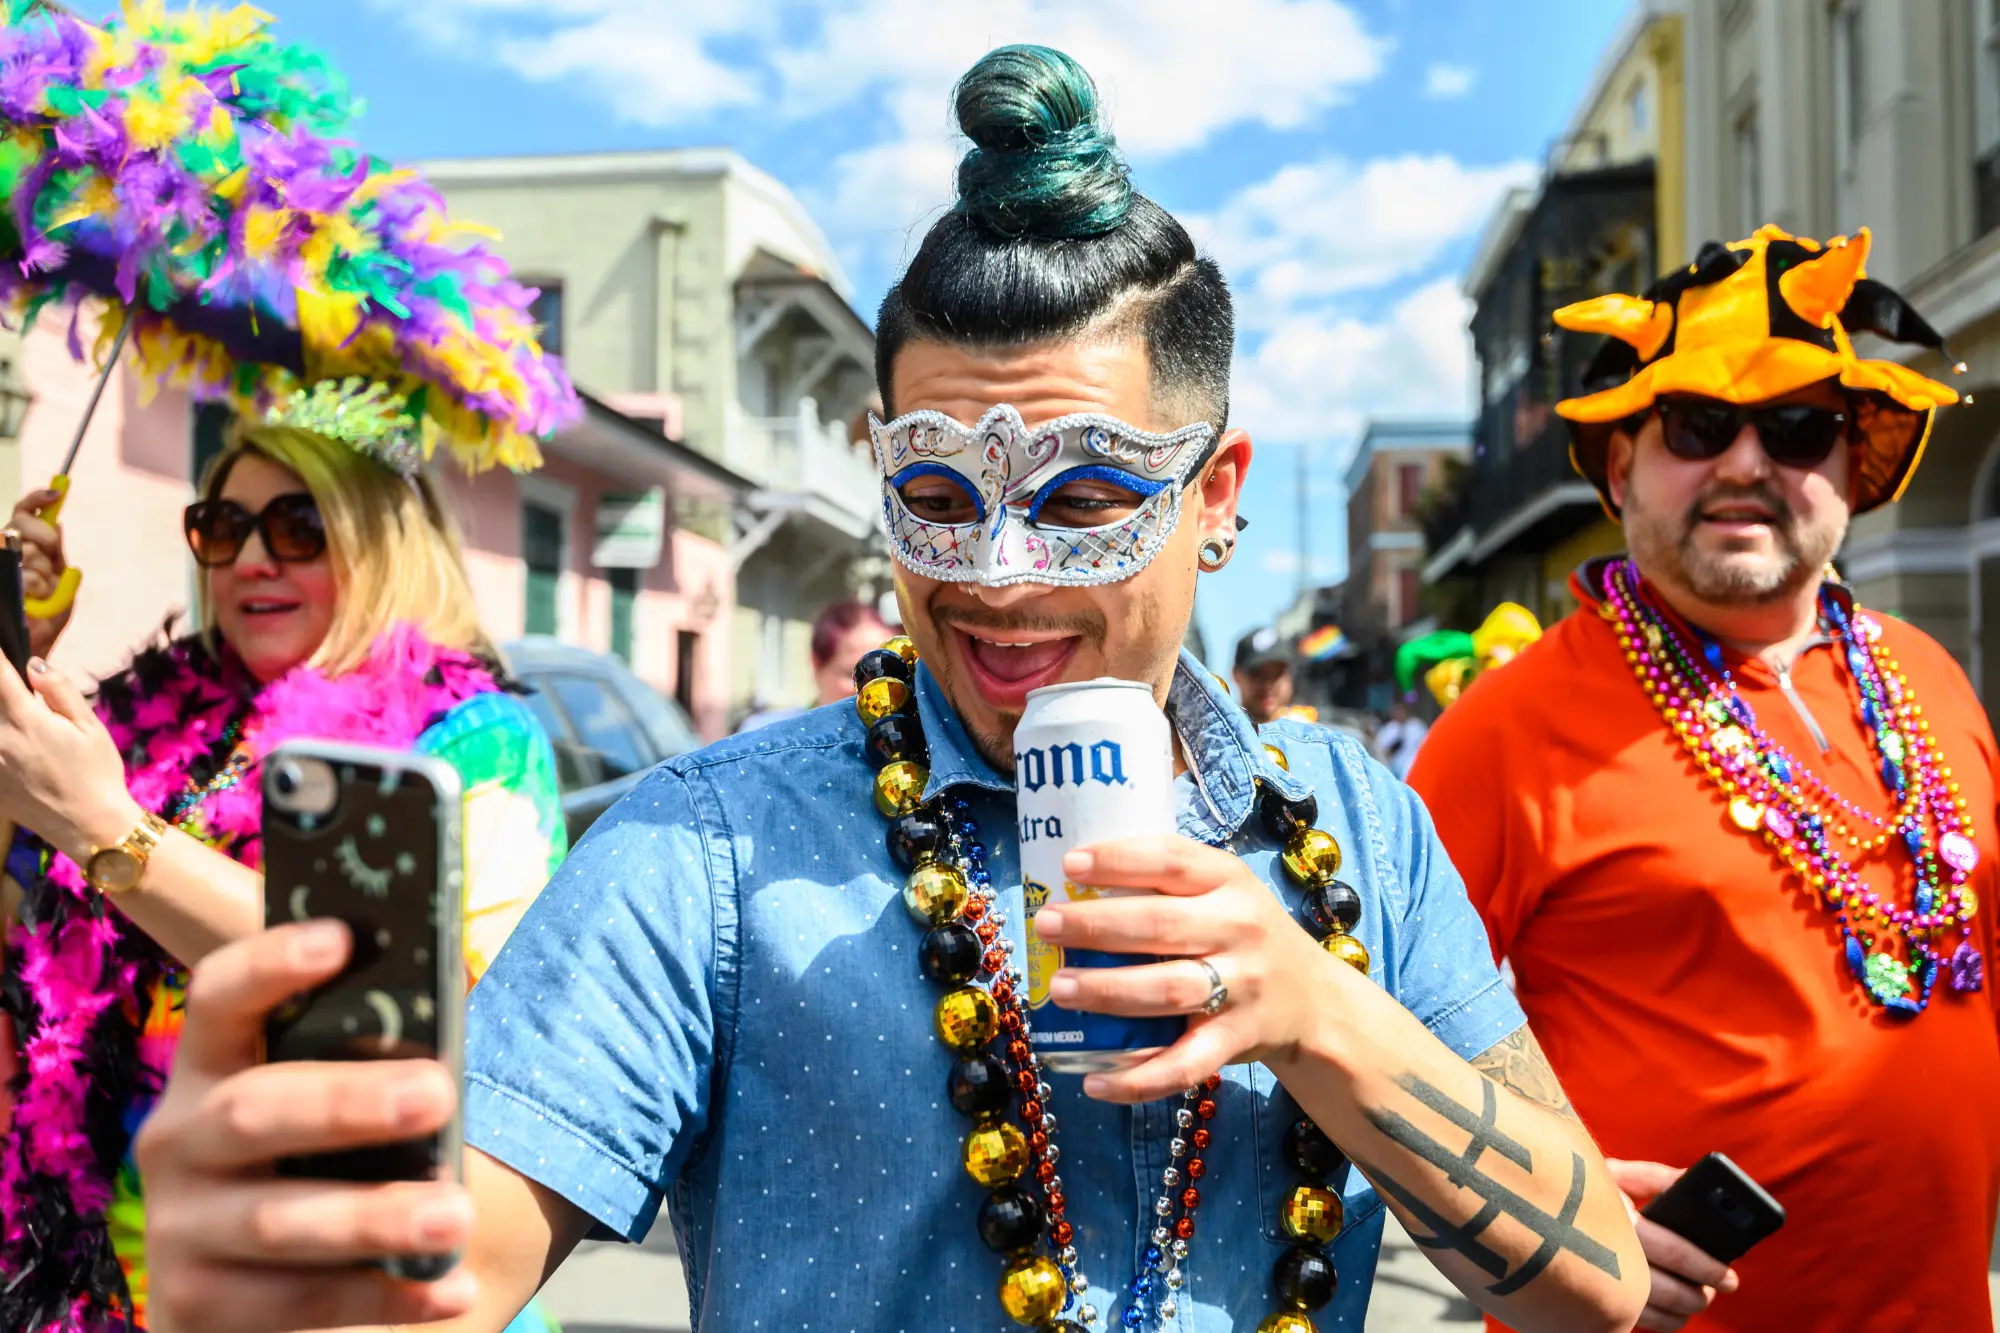 photography in new orleans